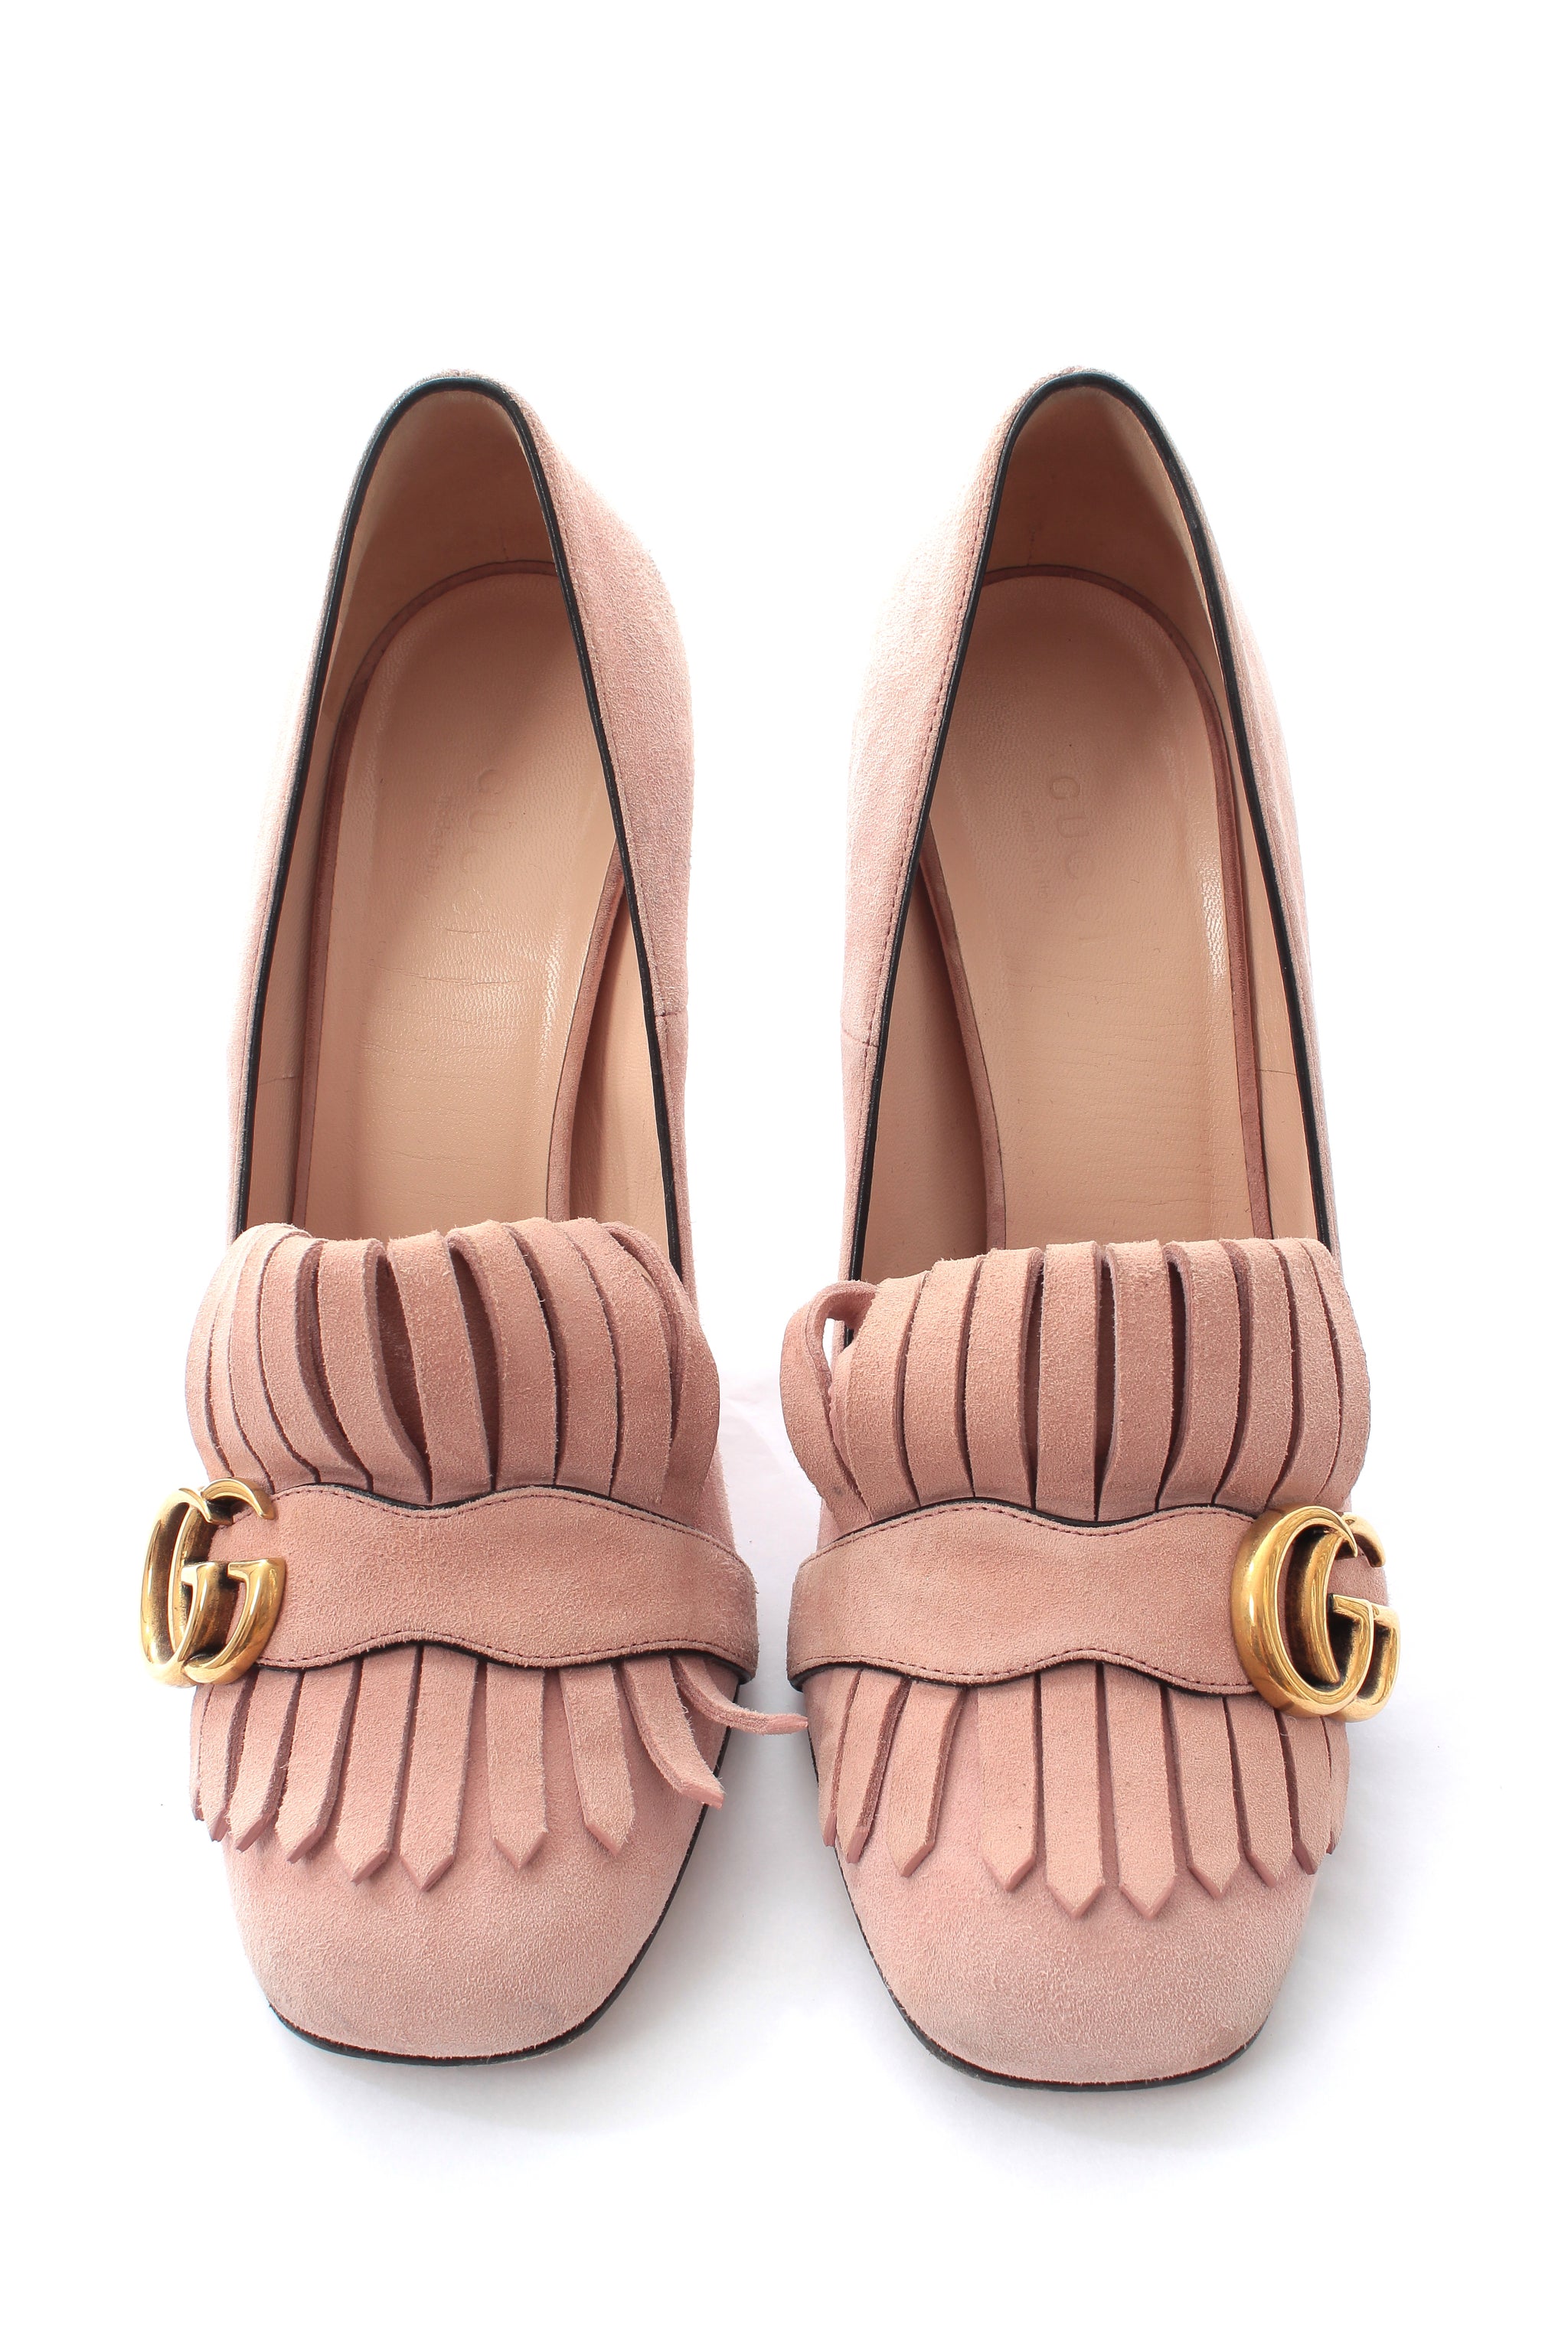 Gucci Marmont Fringed Suede Loafer Pumps Closet Upgrade